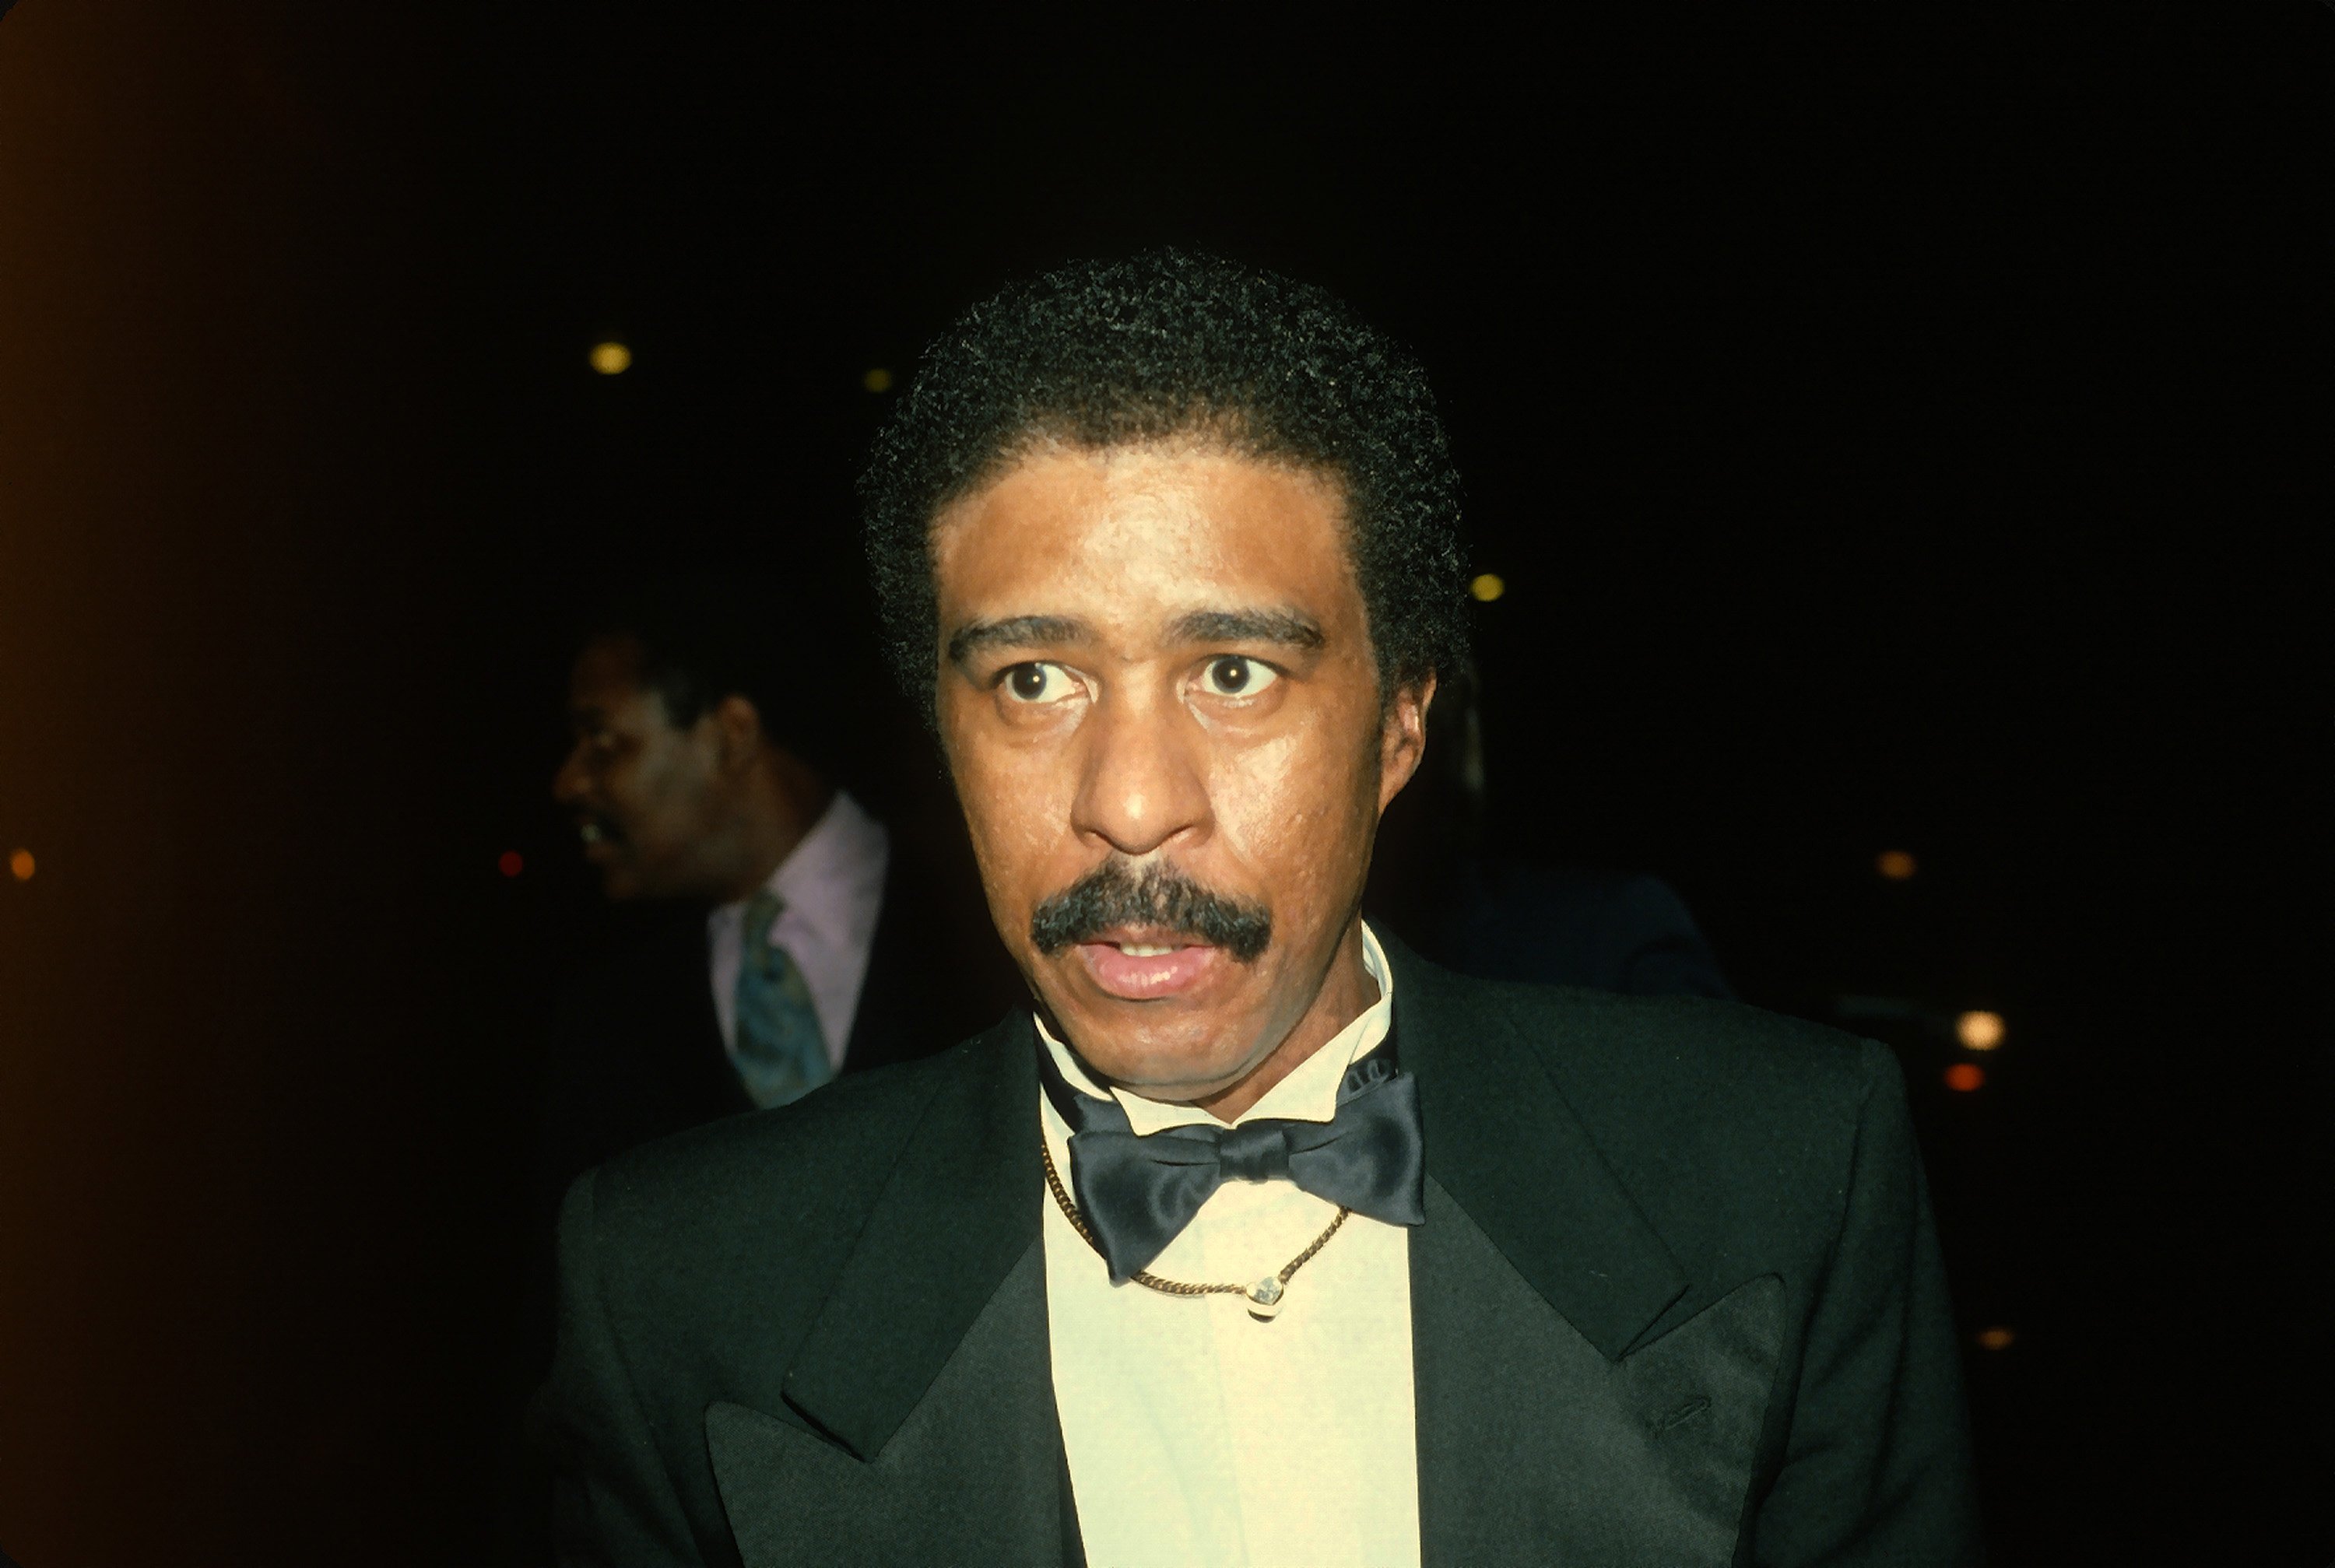 Richard Pryor Once Set Himself on Fire & Suffered Severe Burns - Here’s